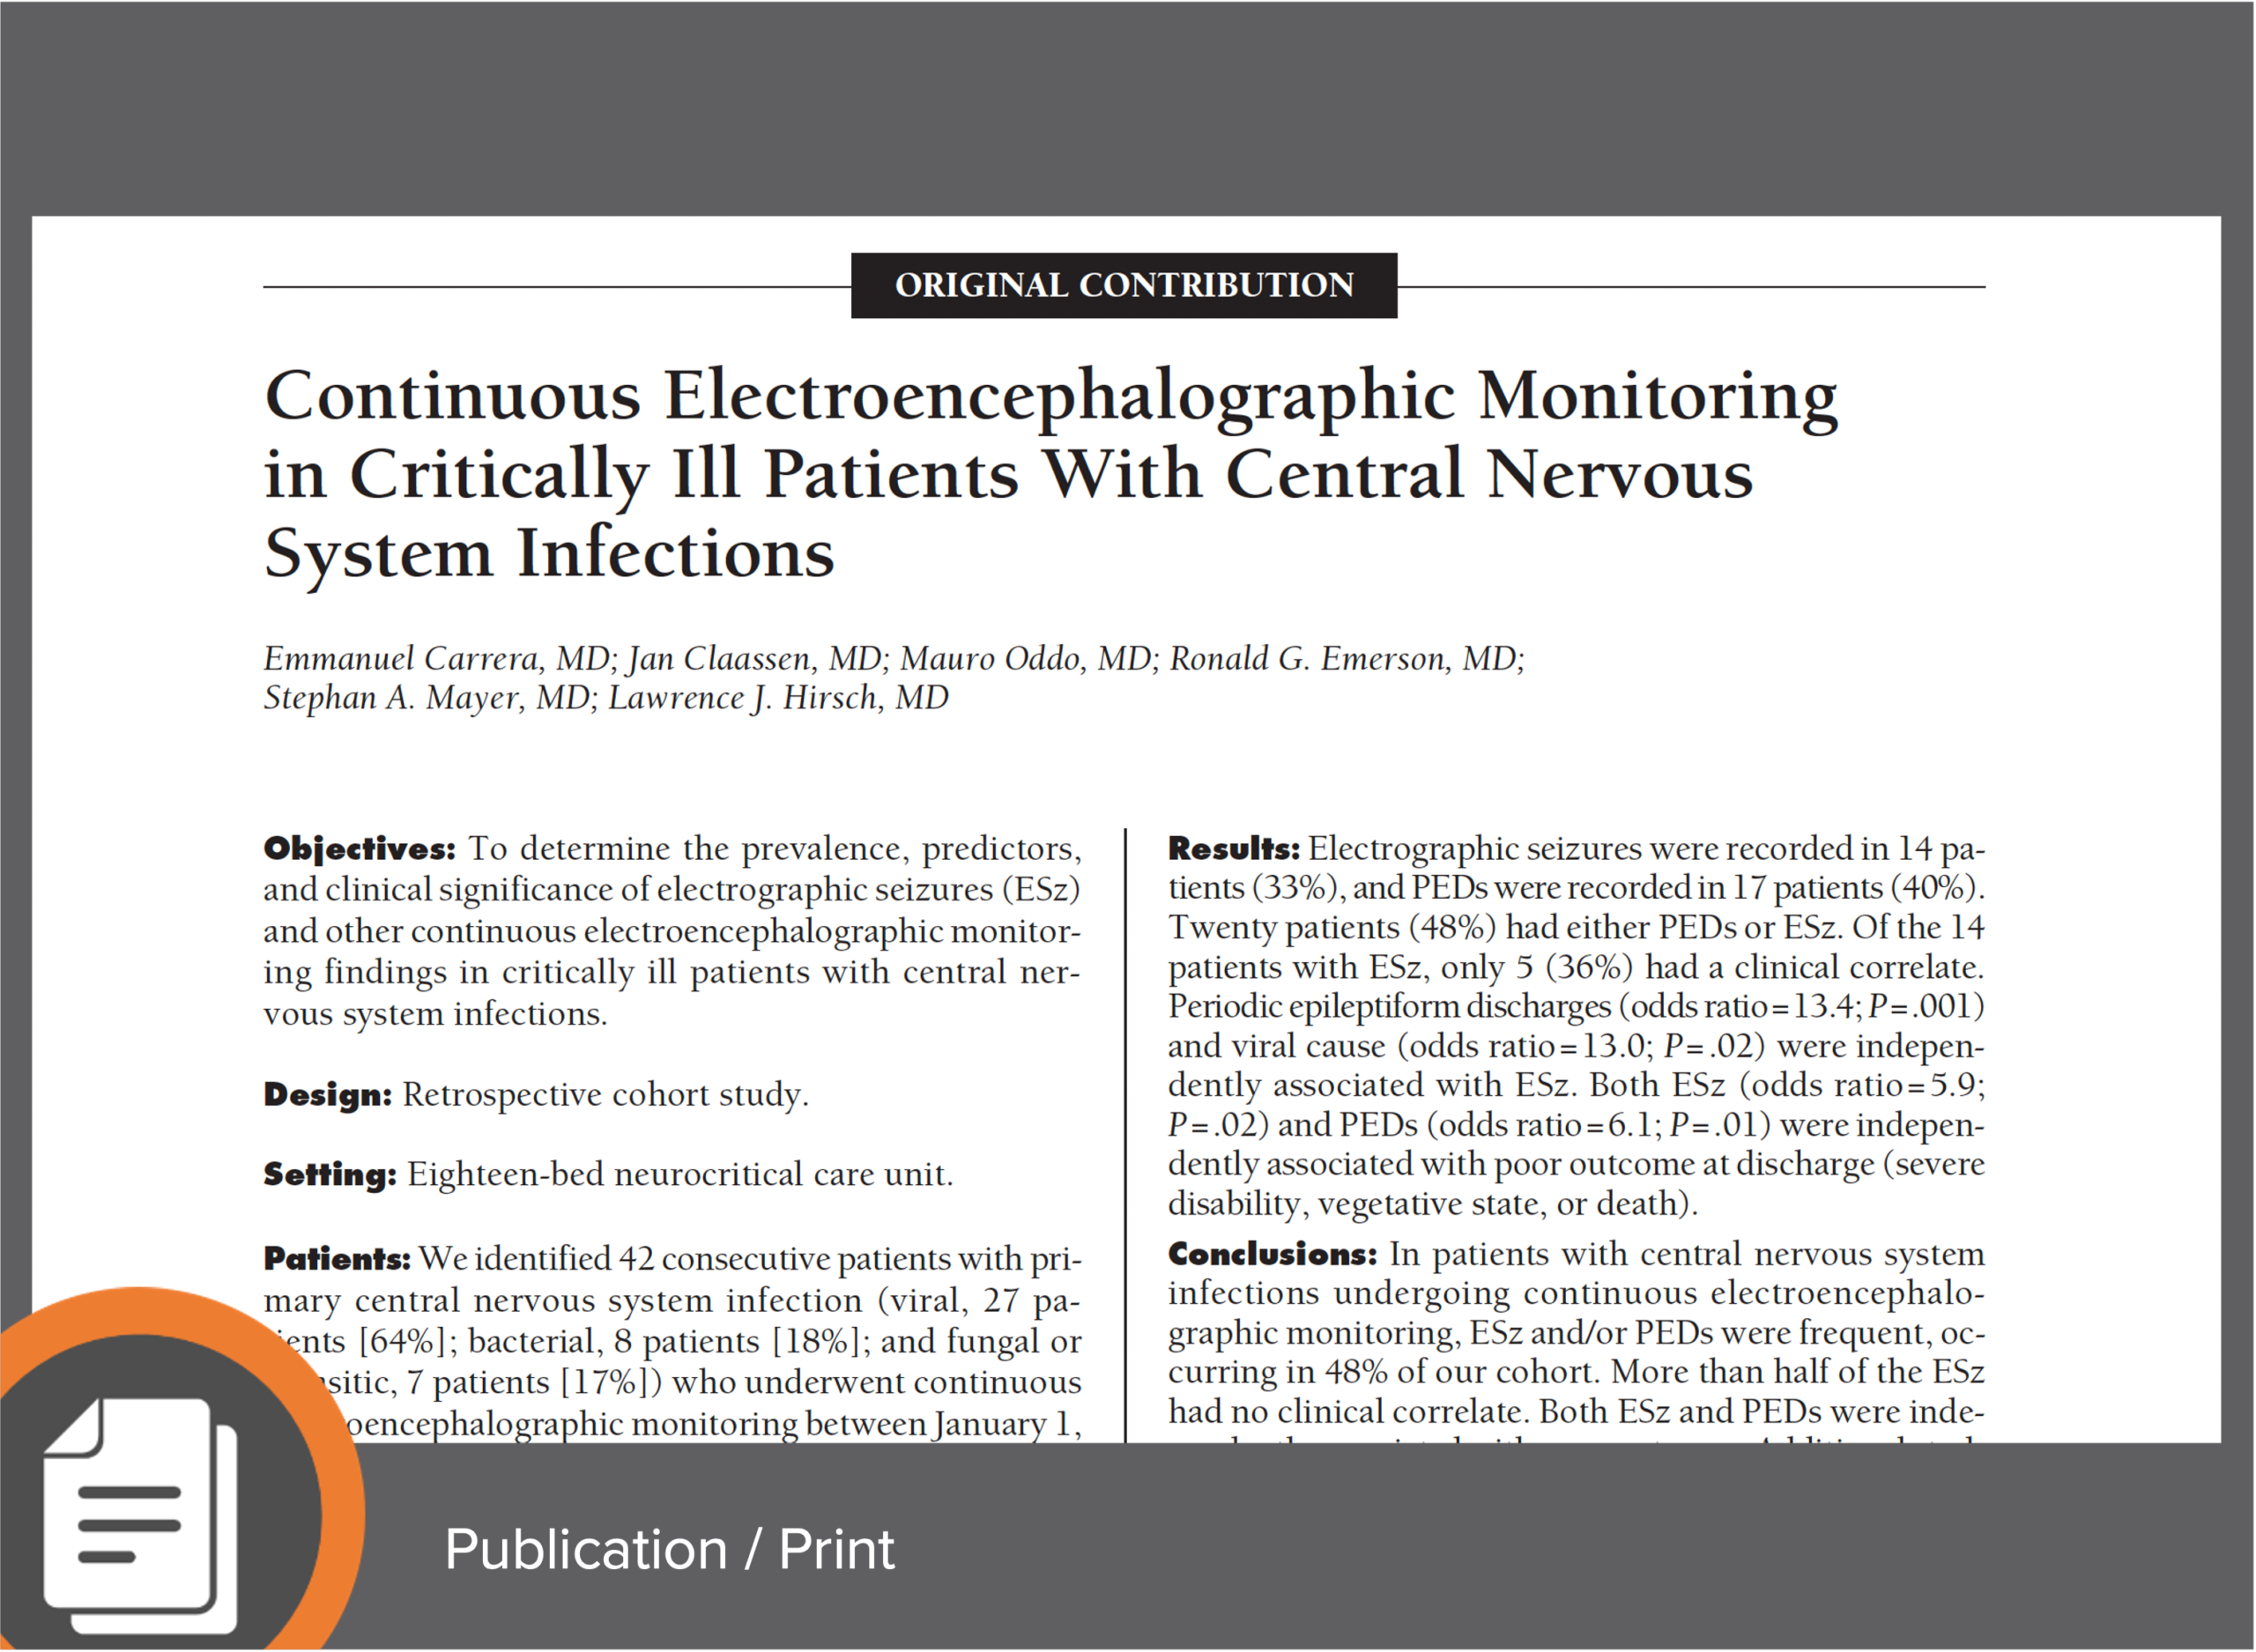 Continuous Electroencephalographic Monitoring in Critically Ill Patients With Central Nervous System Infections